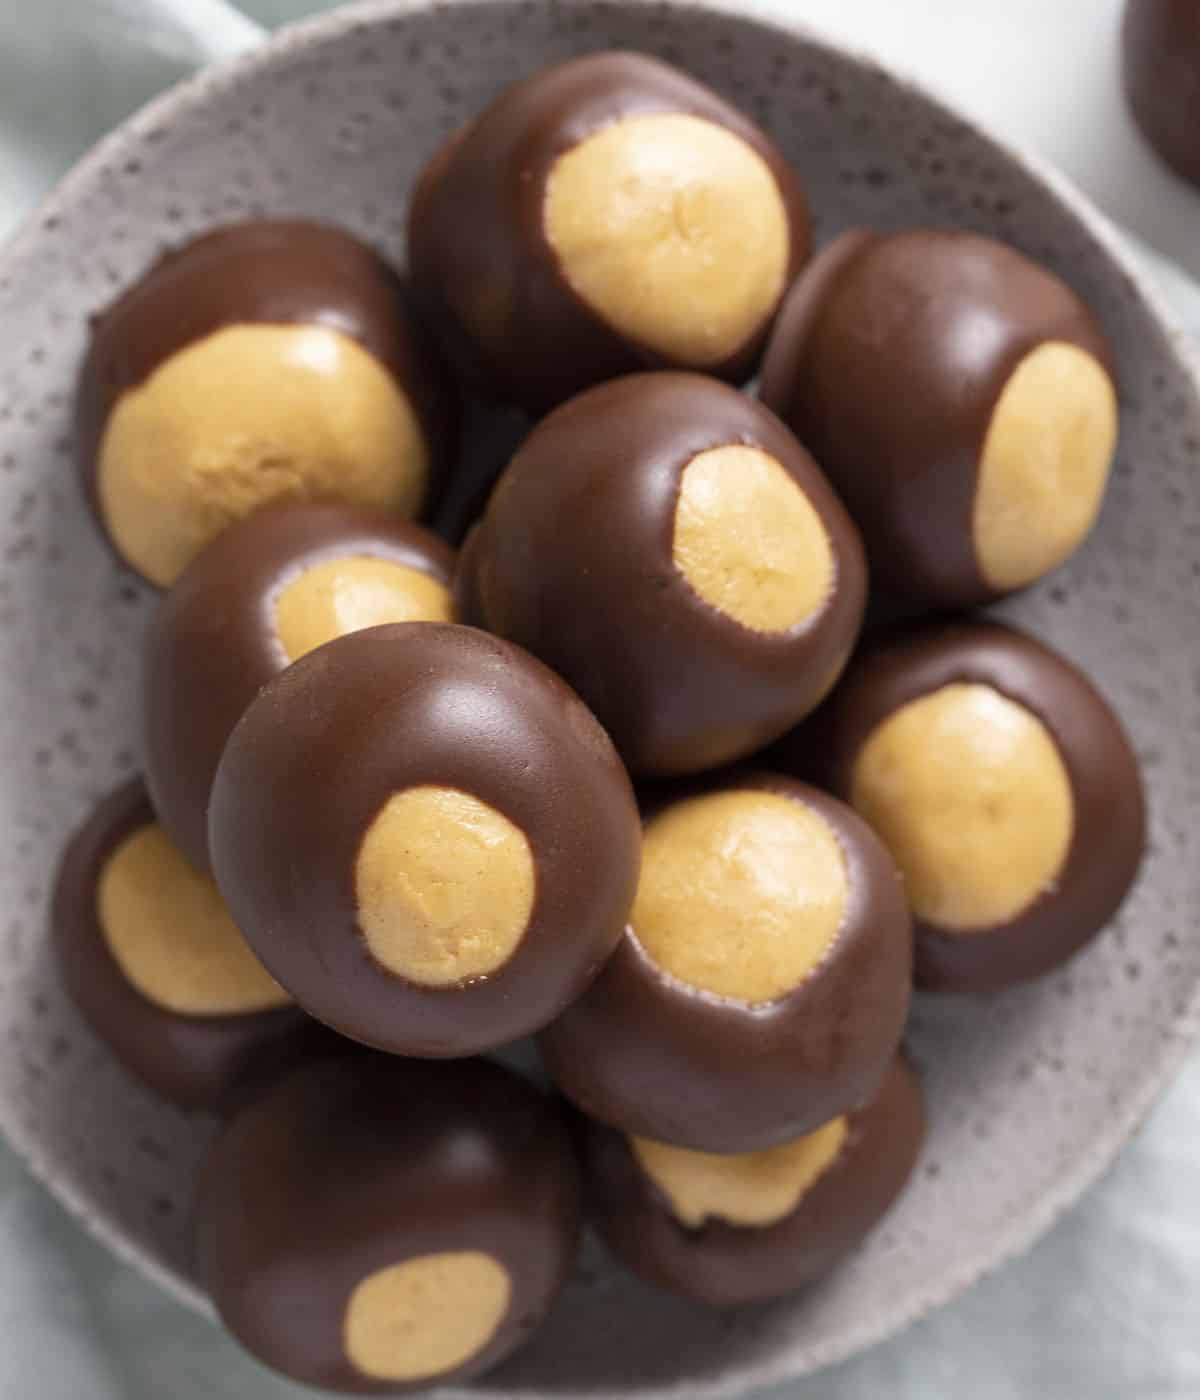 A group of buckeyes in a light-colored bowl.